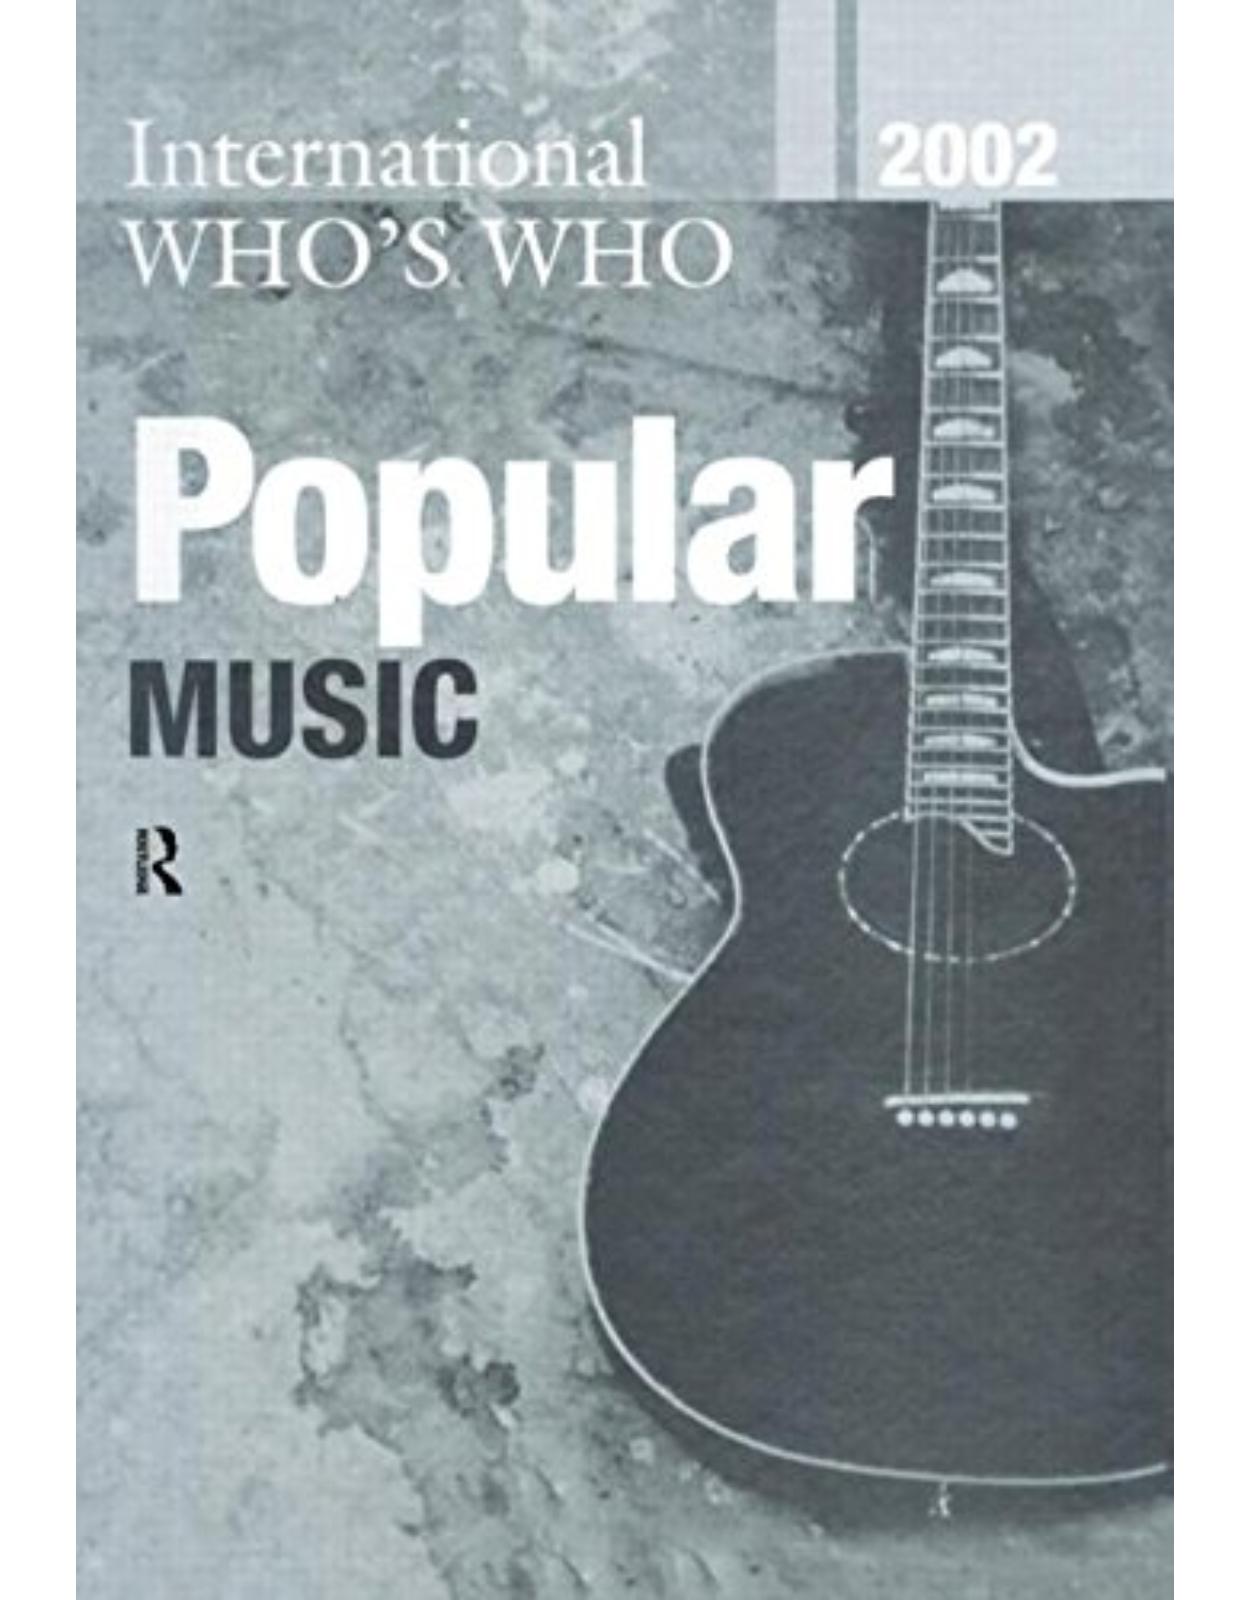 The International Who's Who in Popular Music